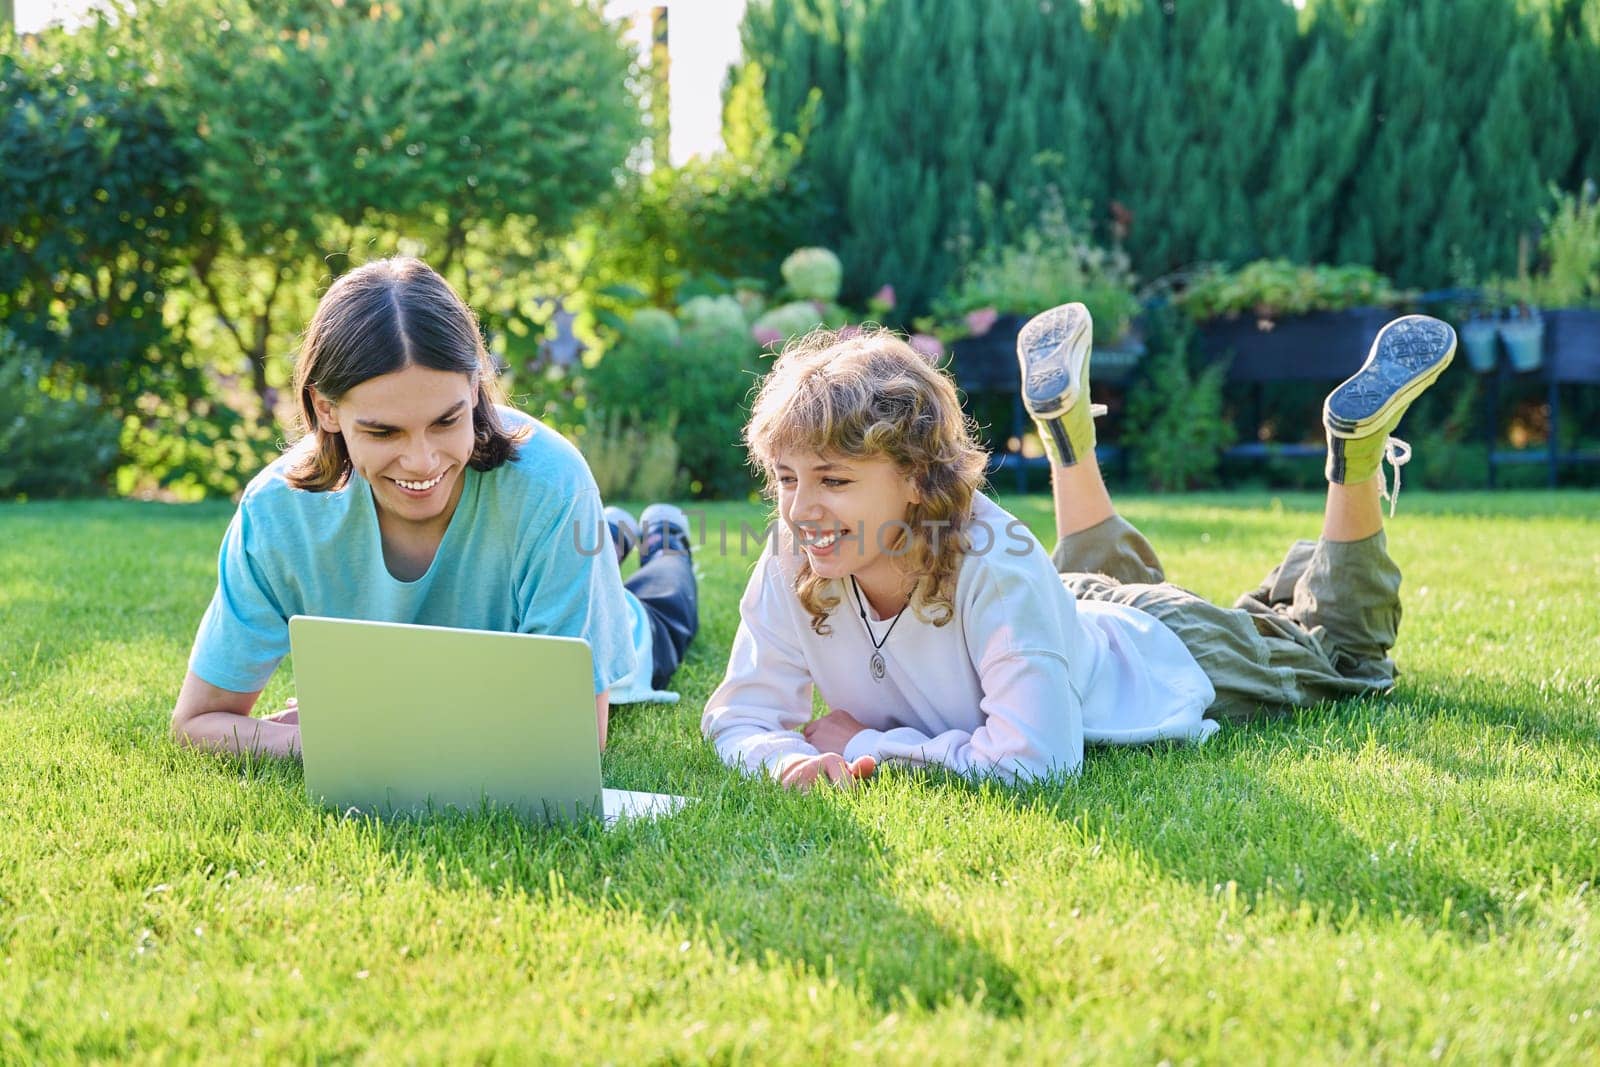 Two teenage friends of students lying on grass with laptop, in backyard, guy and girl 16, 17 years old study together. Friendship, youth, technology, high school, college, lifestyle concept